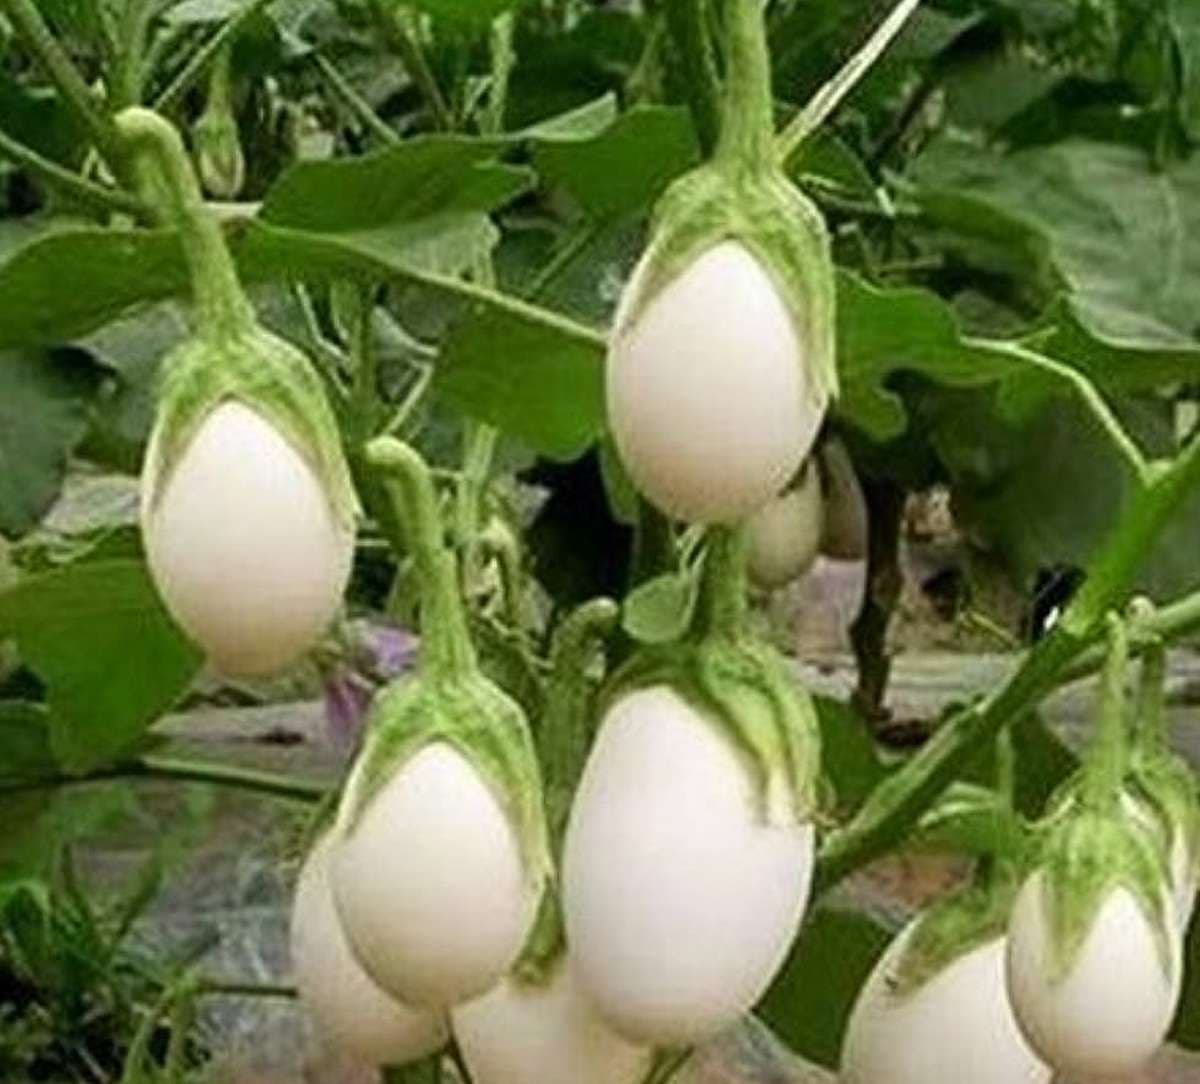 White eggplant A natural way to lower bad cholesterol